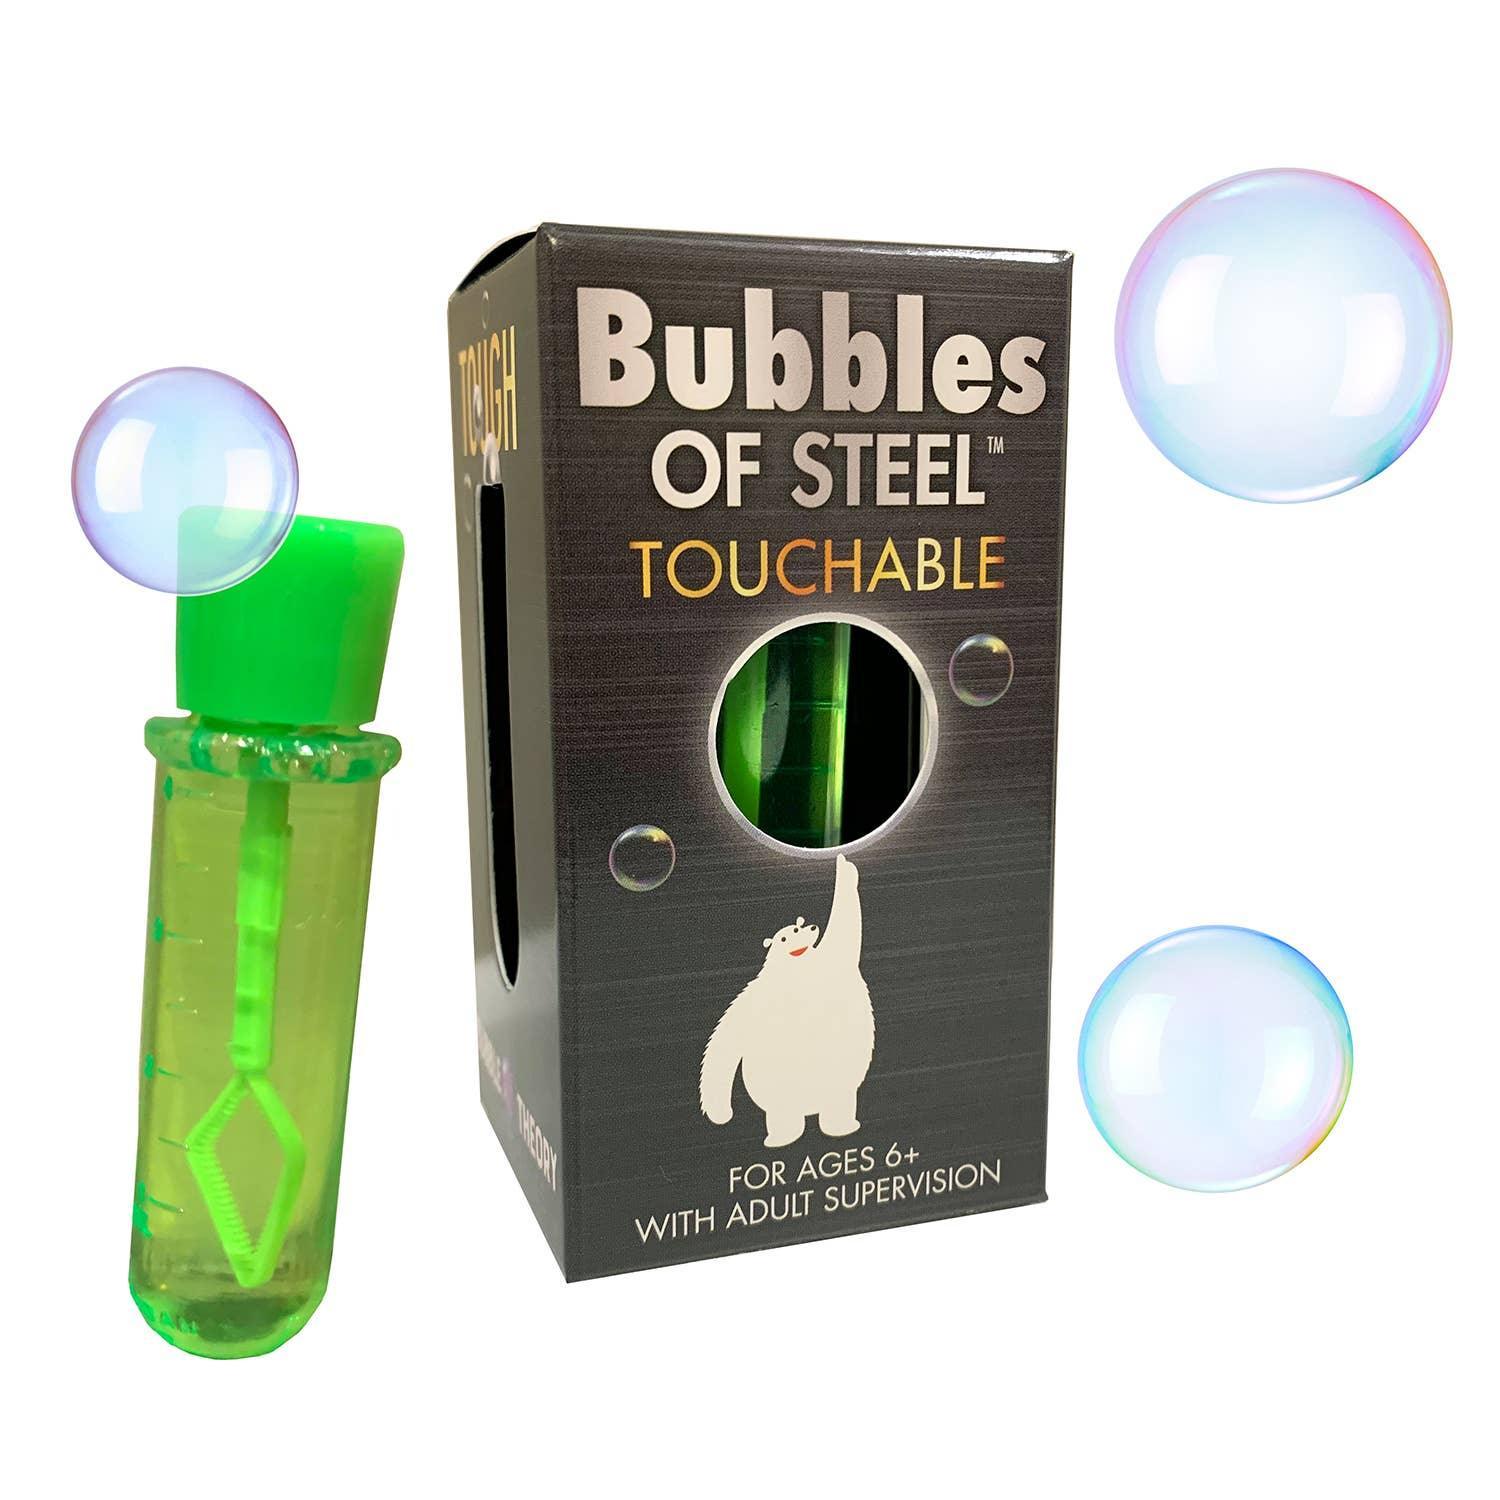 Bubbles of Steel: Touchable and Heroic bubbles - Why and Whale